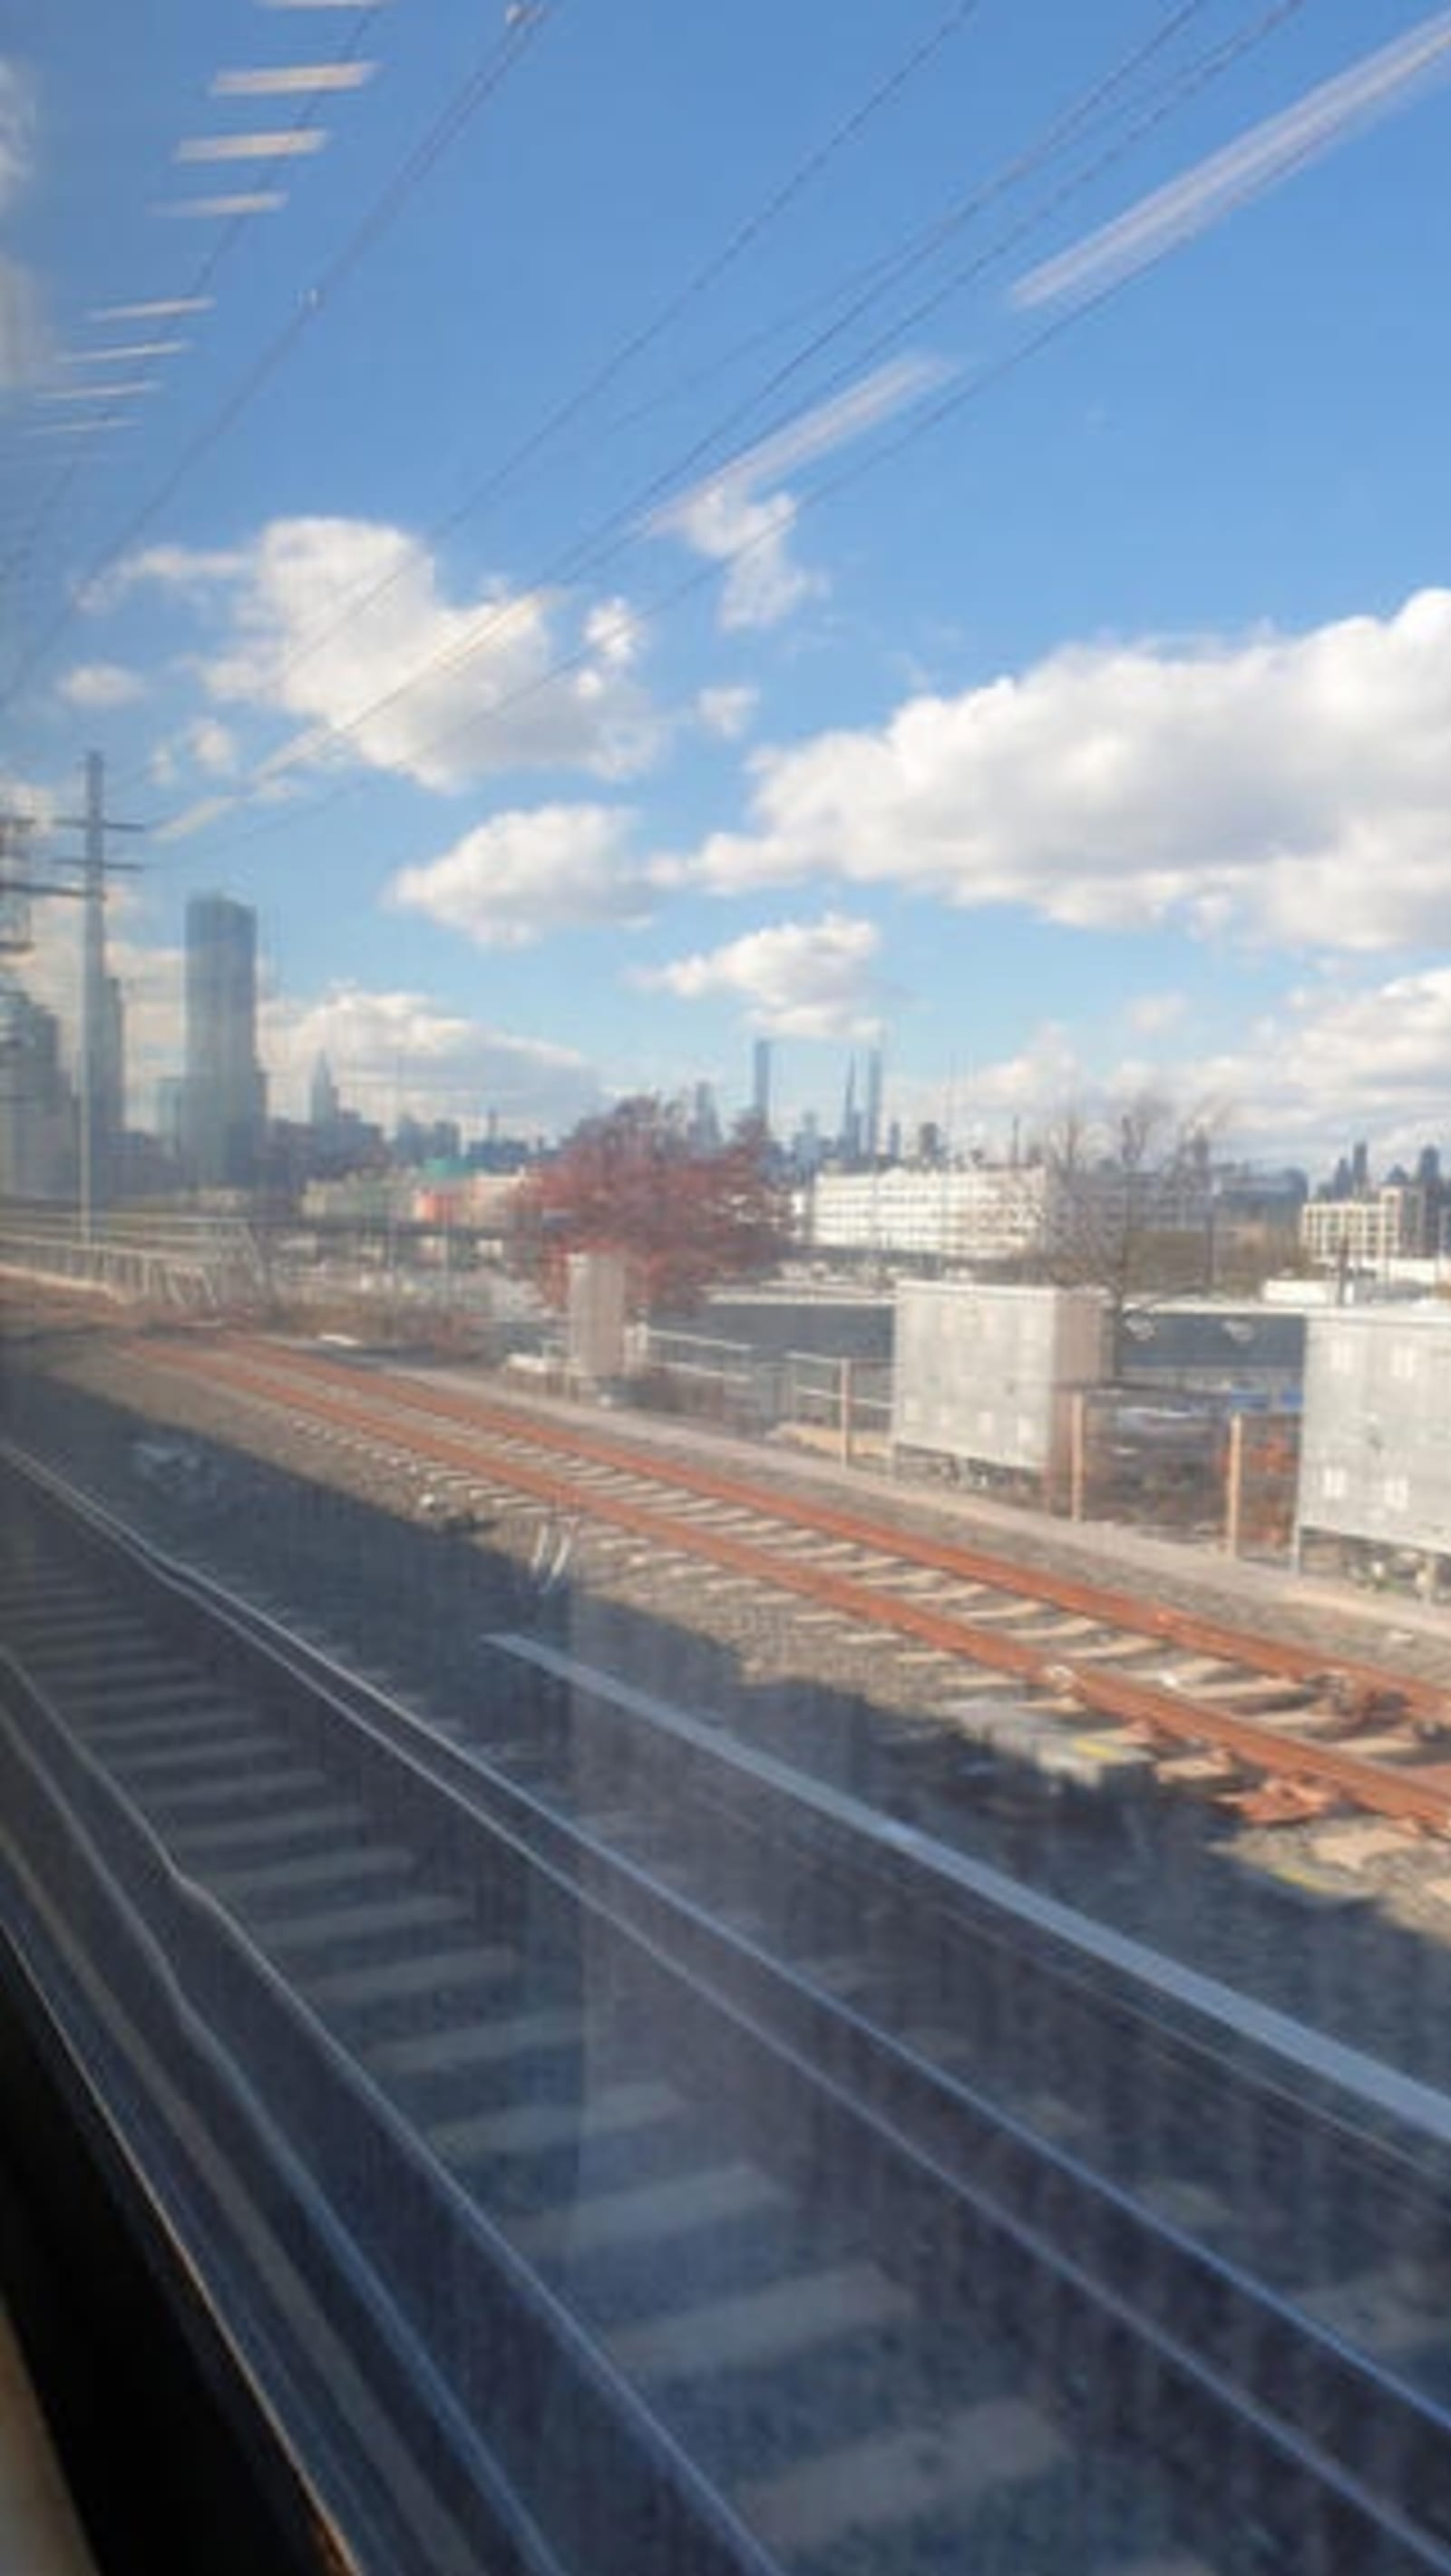 View from train to Manhattan from Jamaica station